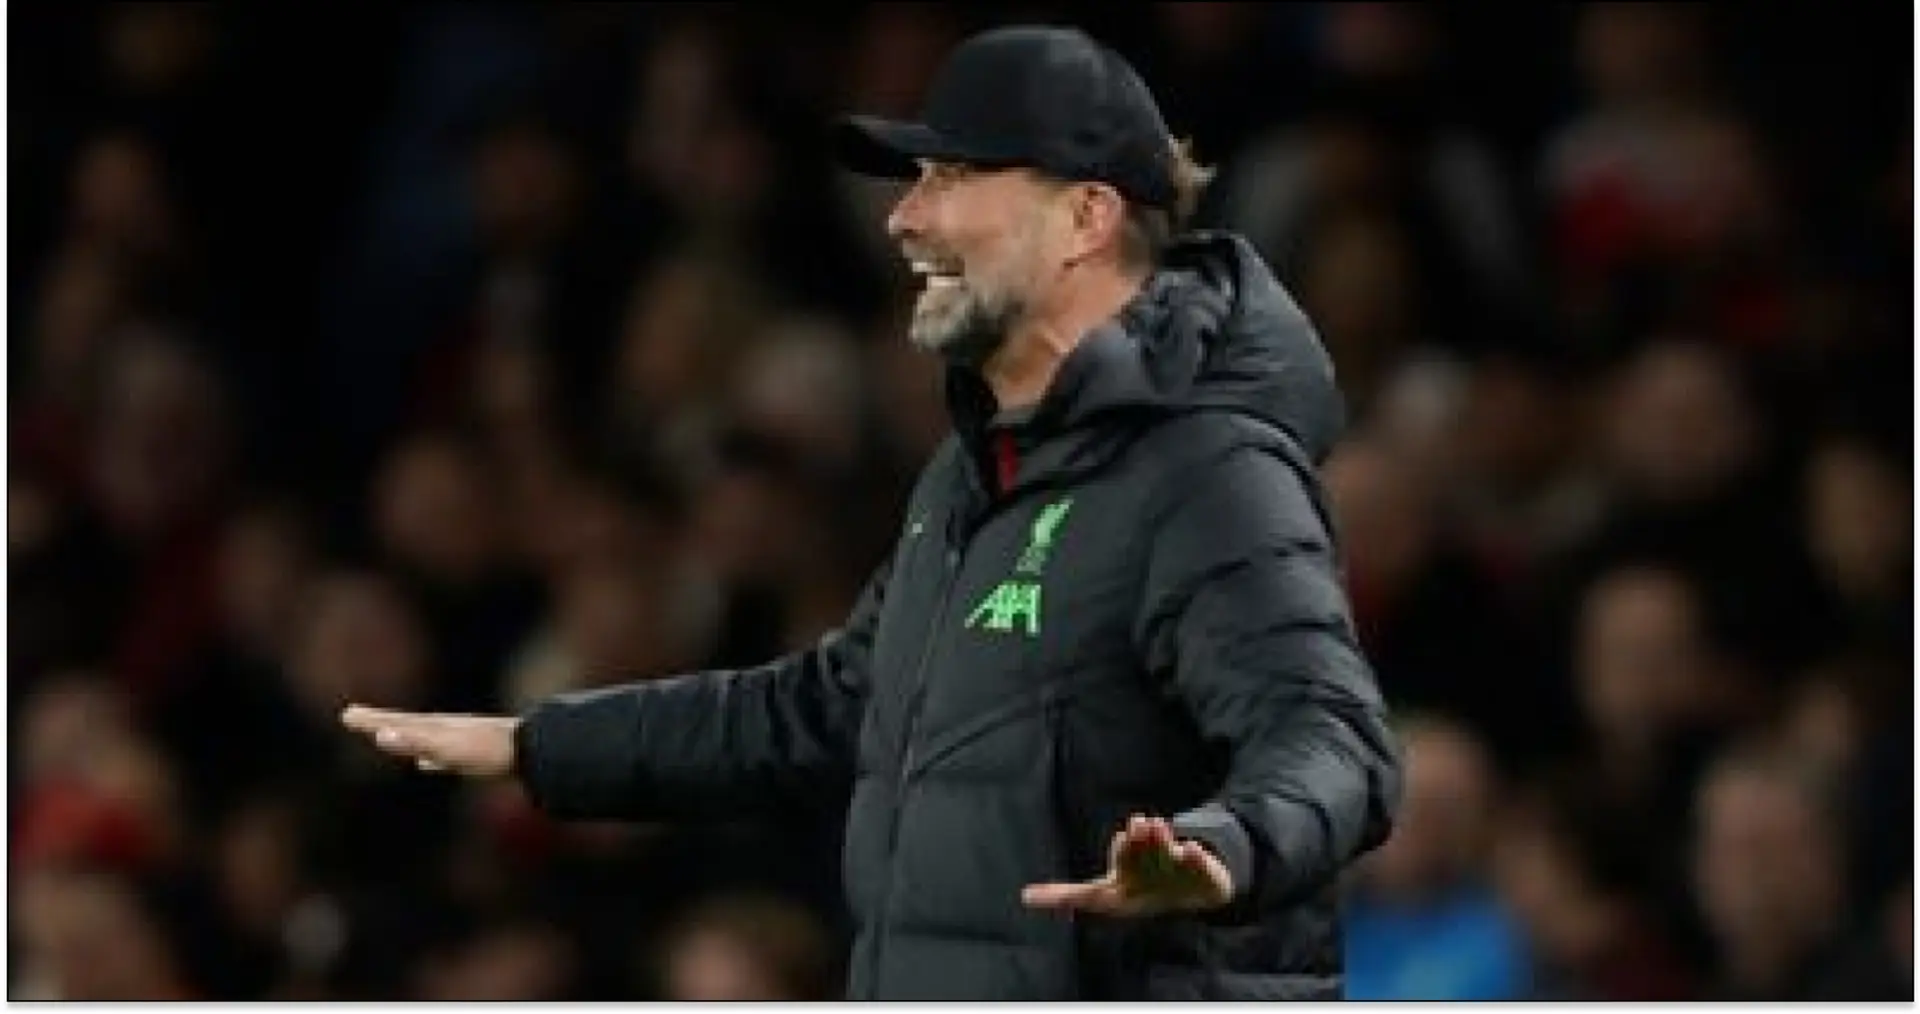 New footage shows Klopp lashing out at one player after Saka's goal in Arsenal game